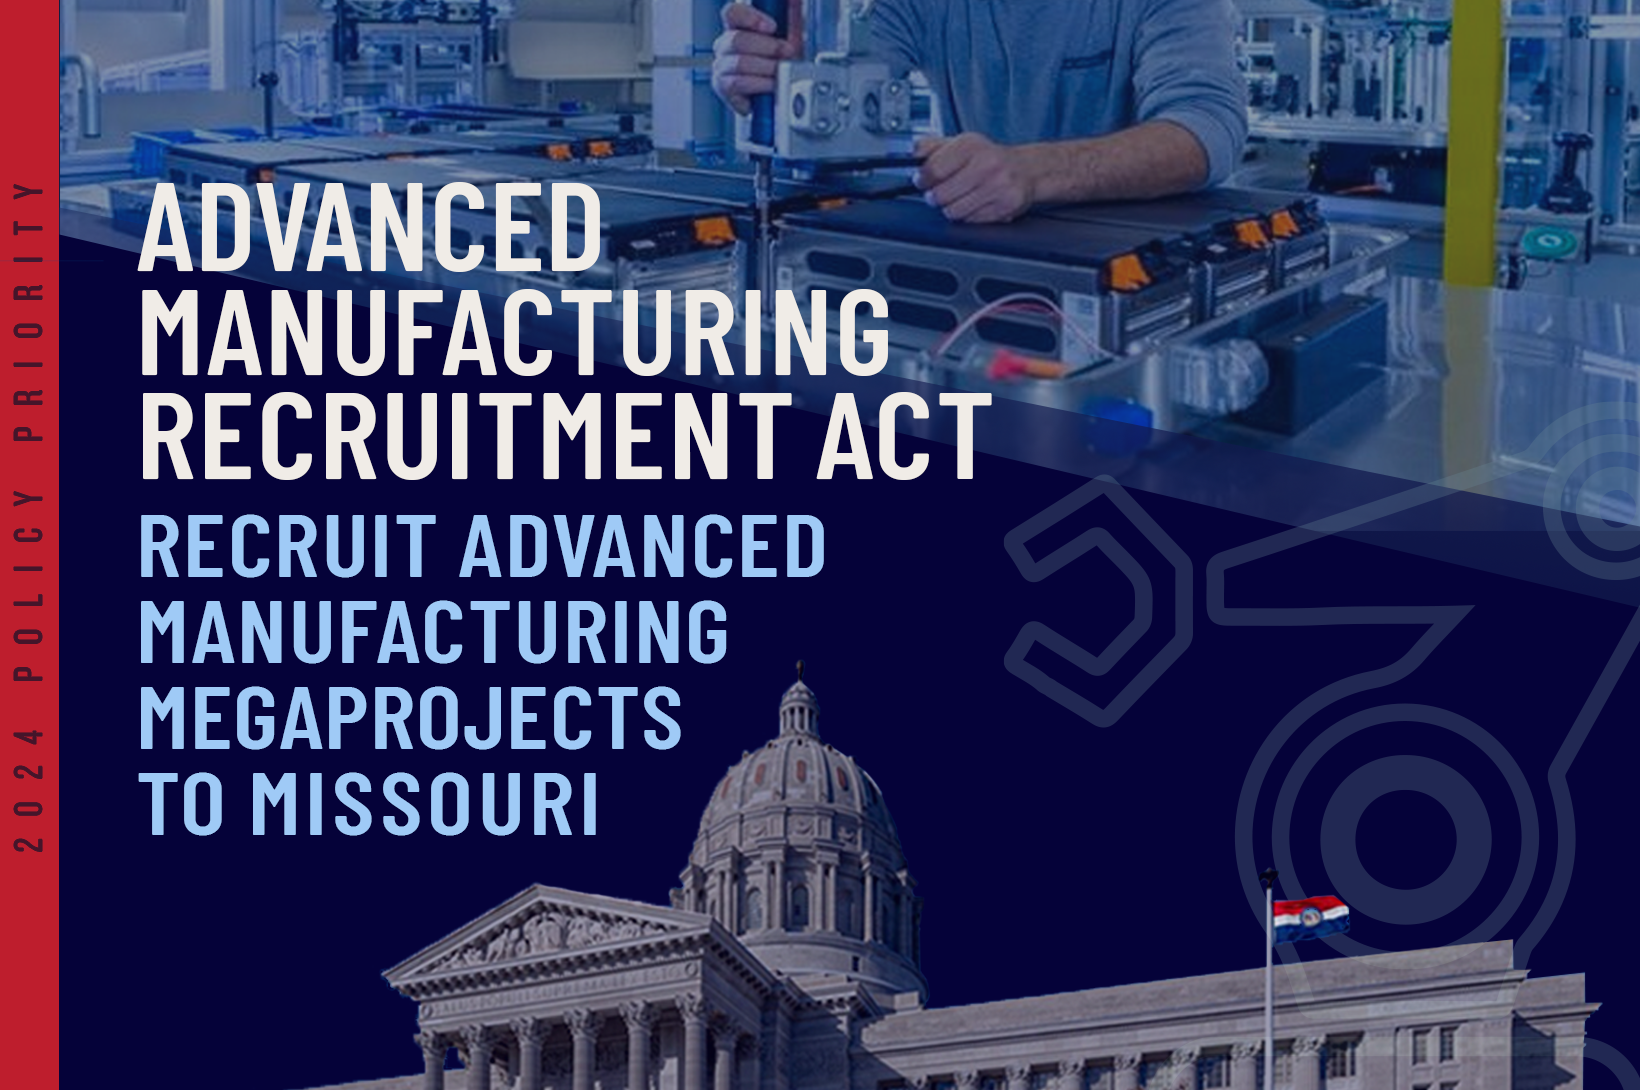 Image featuring the Missouri capitol and the words "Advanced Manufacturing Recruitment Act: Recruit Advanced Manufacturing Megaprojects to Missouri"